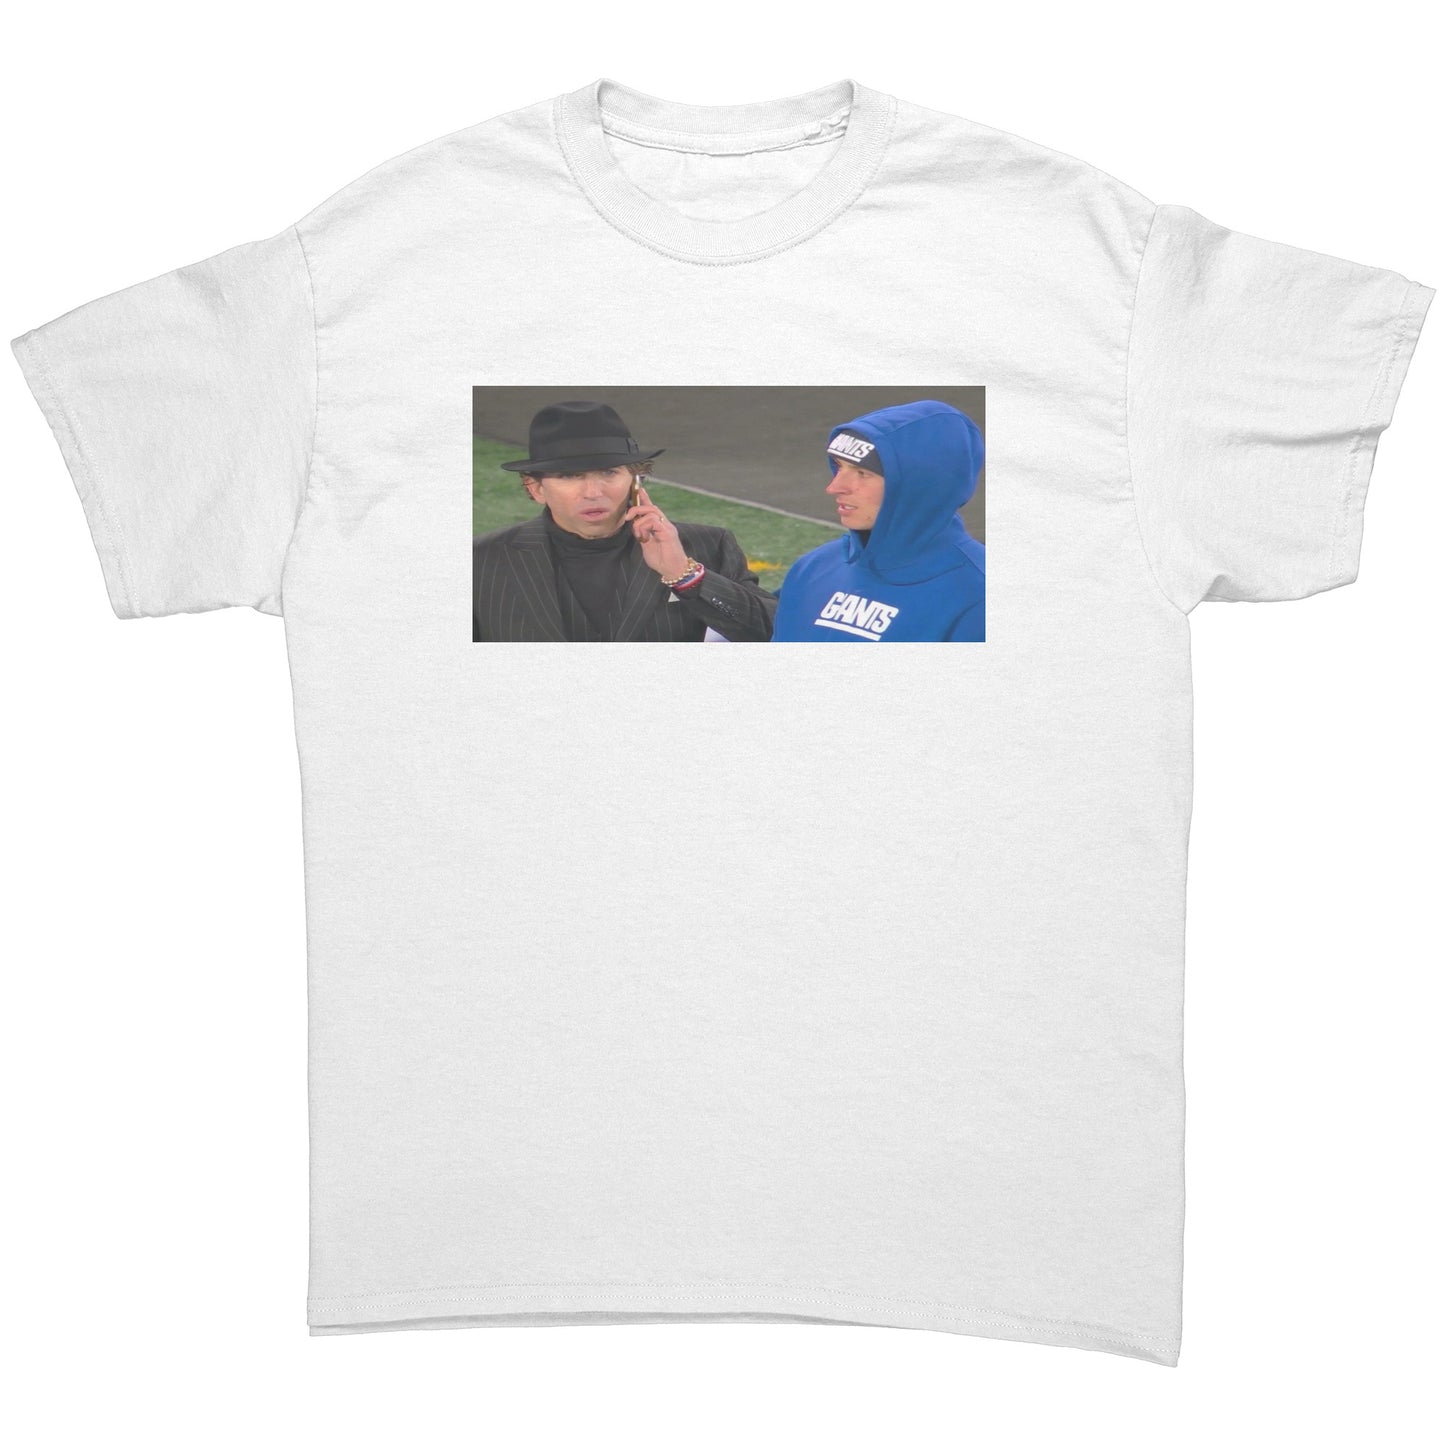 New York Giants - Tommy DeVito's Agent T-Shirt